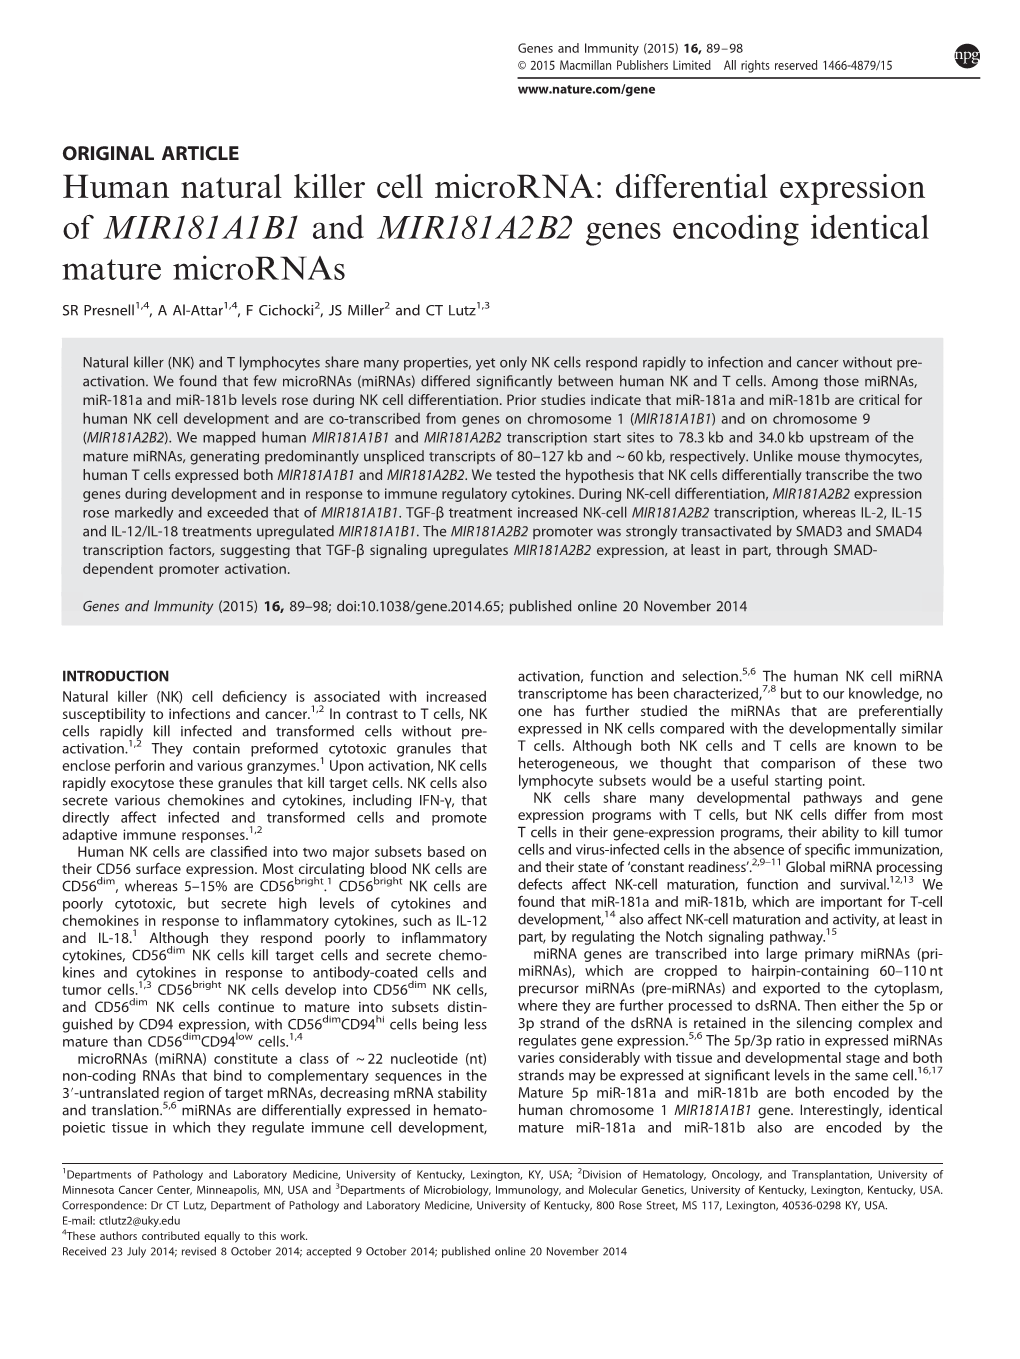 Human Natural Killer Cell Microrna: Differential Expression of MIR181A1B1 and MIR181A2B2 Genes Encoding Identical Mature Micrornas